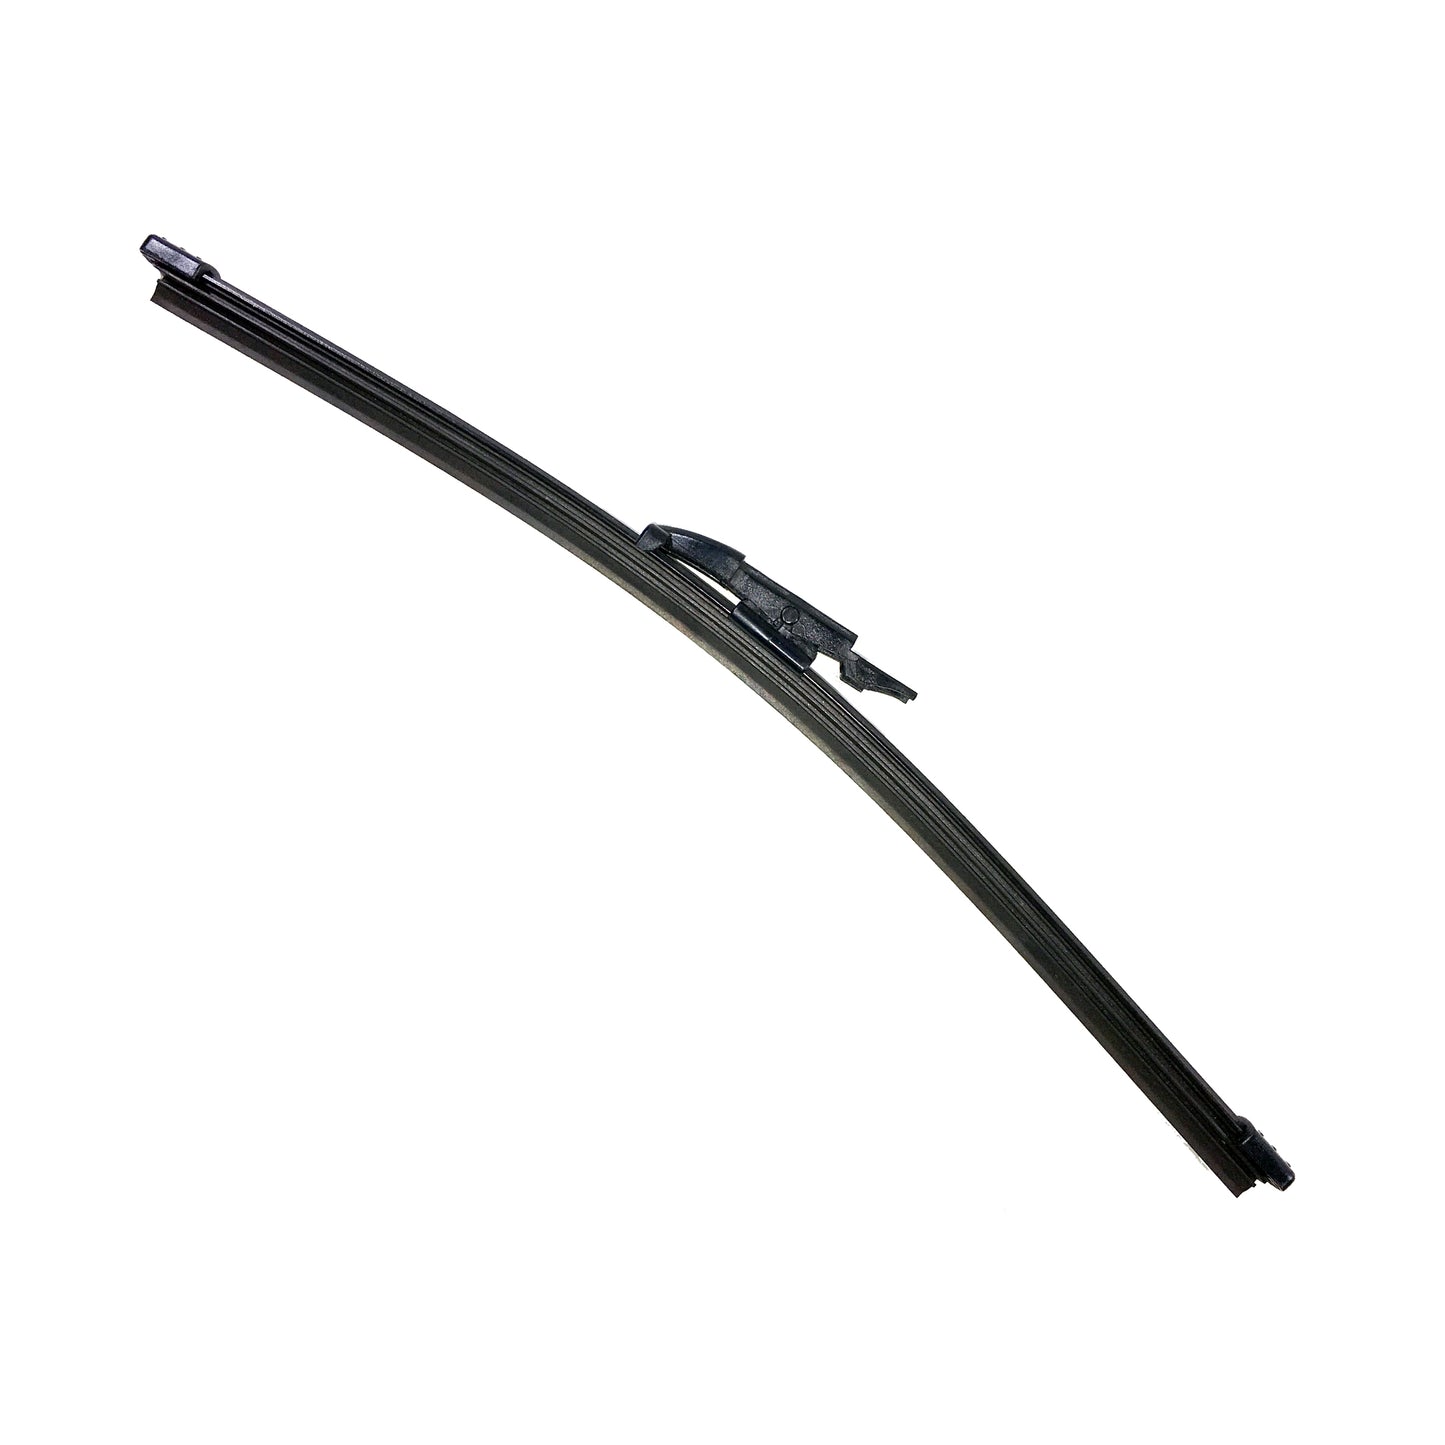 VW CRAFTER 30-50 Chassis Cab Apr 2006 to Dec 2016Rear Wiper Blade 